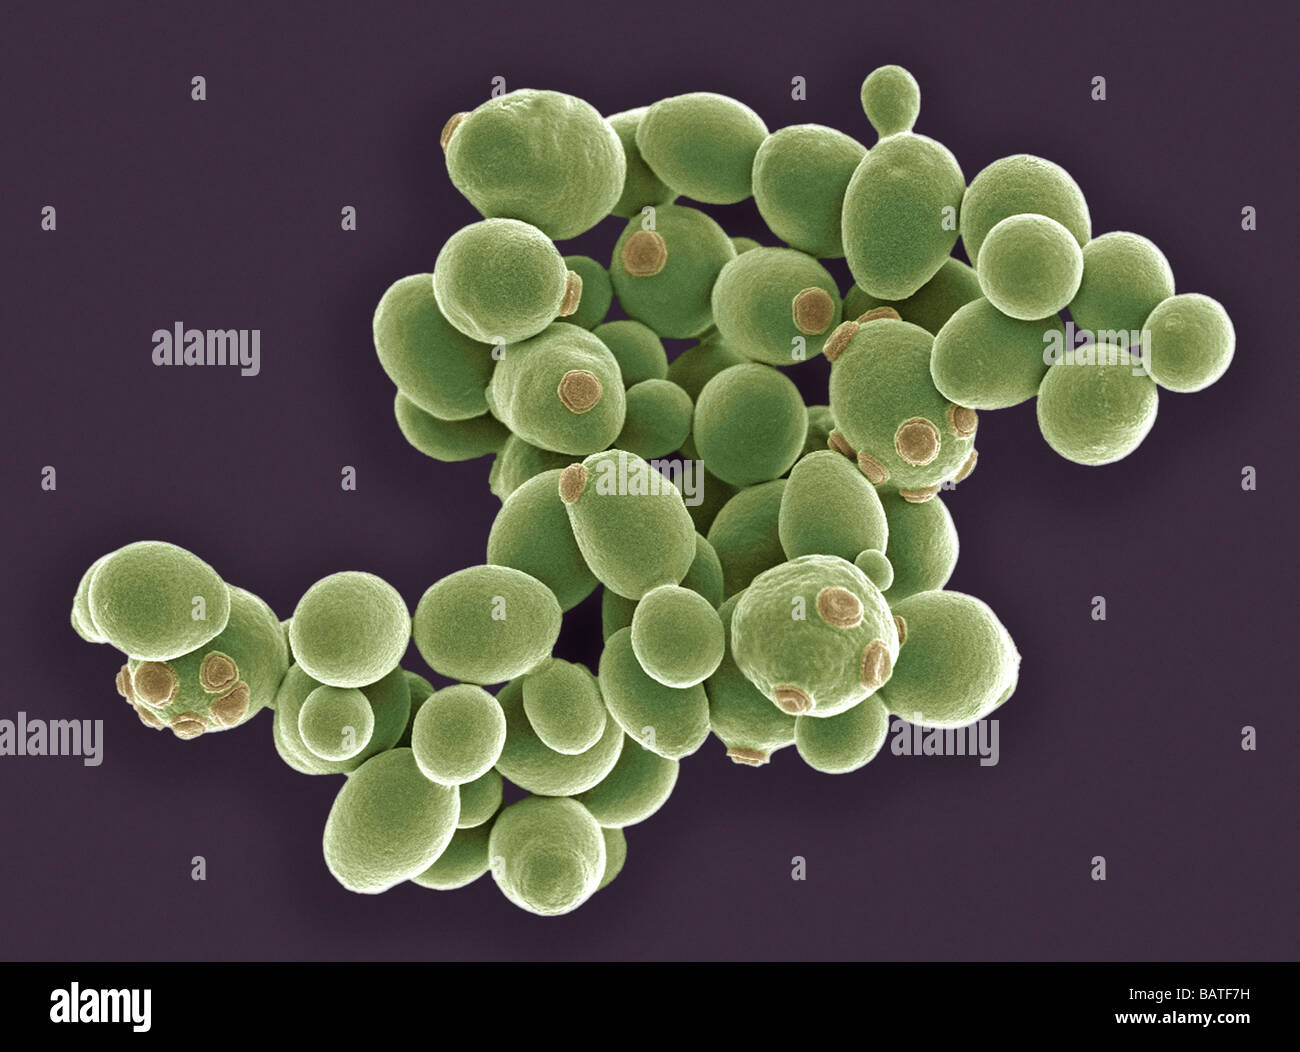 Yeast cells. Coloured scanning electron micrograph(SEM) of cells of brewer's yeast (Saccharomycescerevisiae). Stock Photo